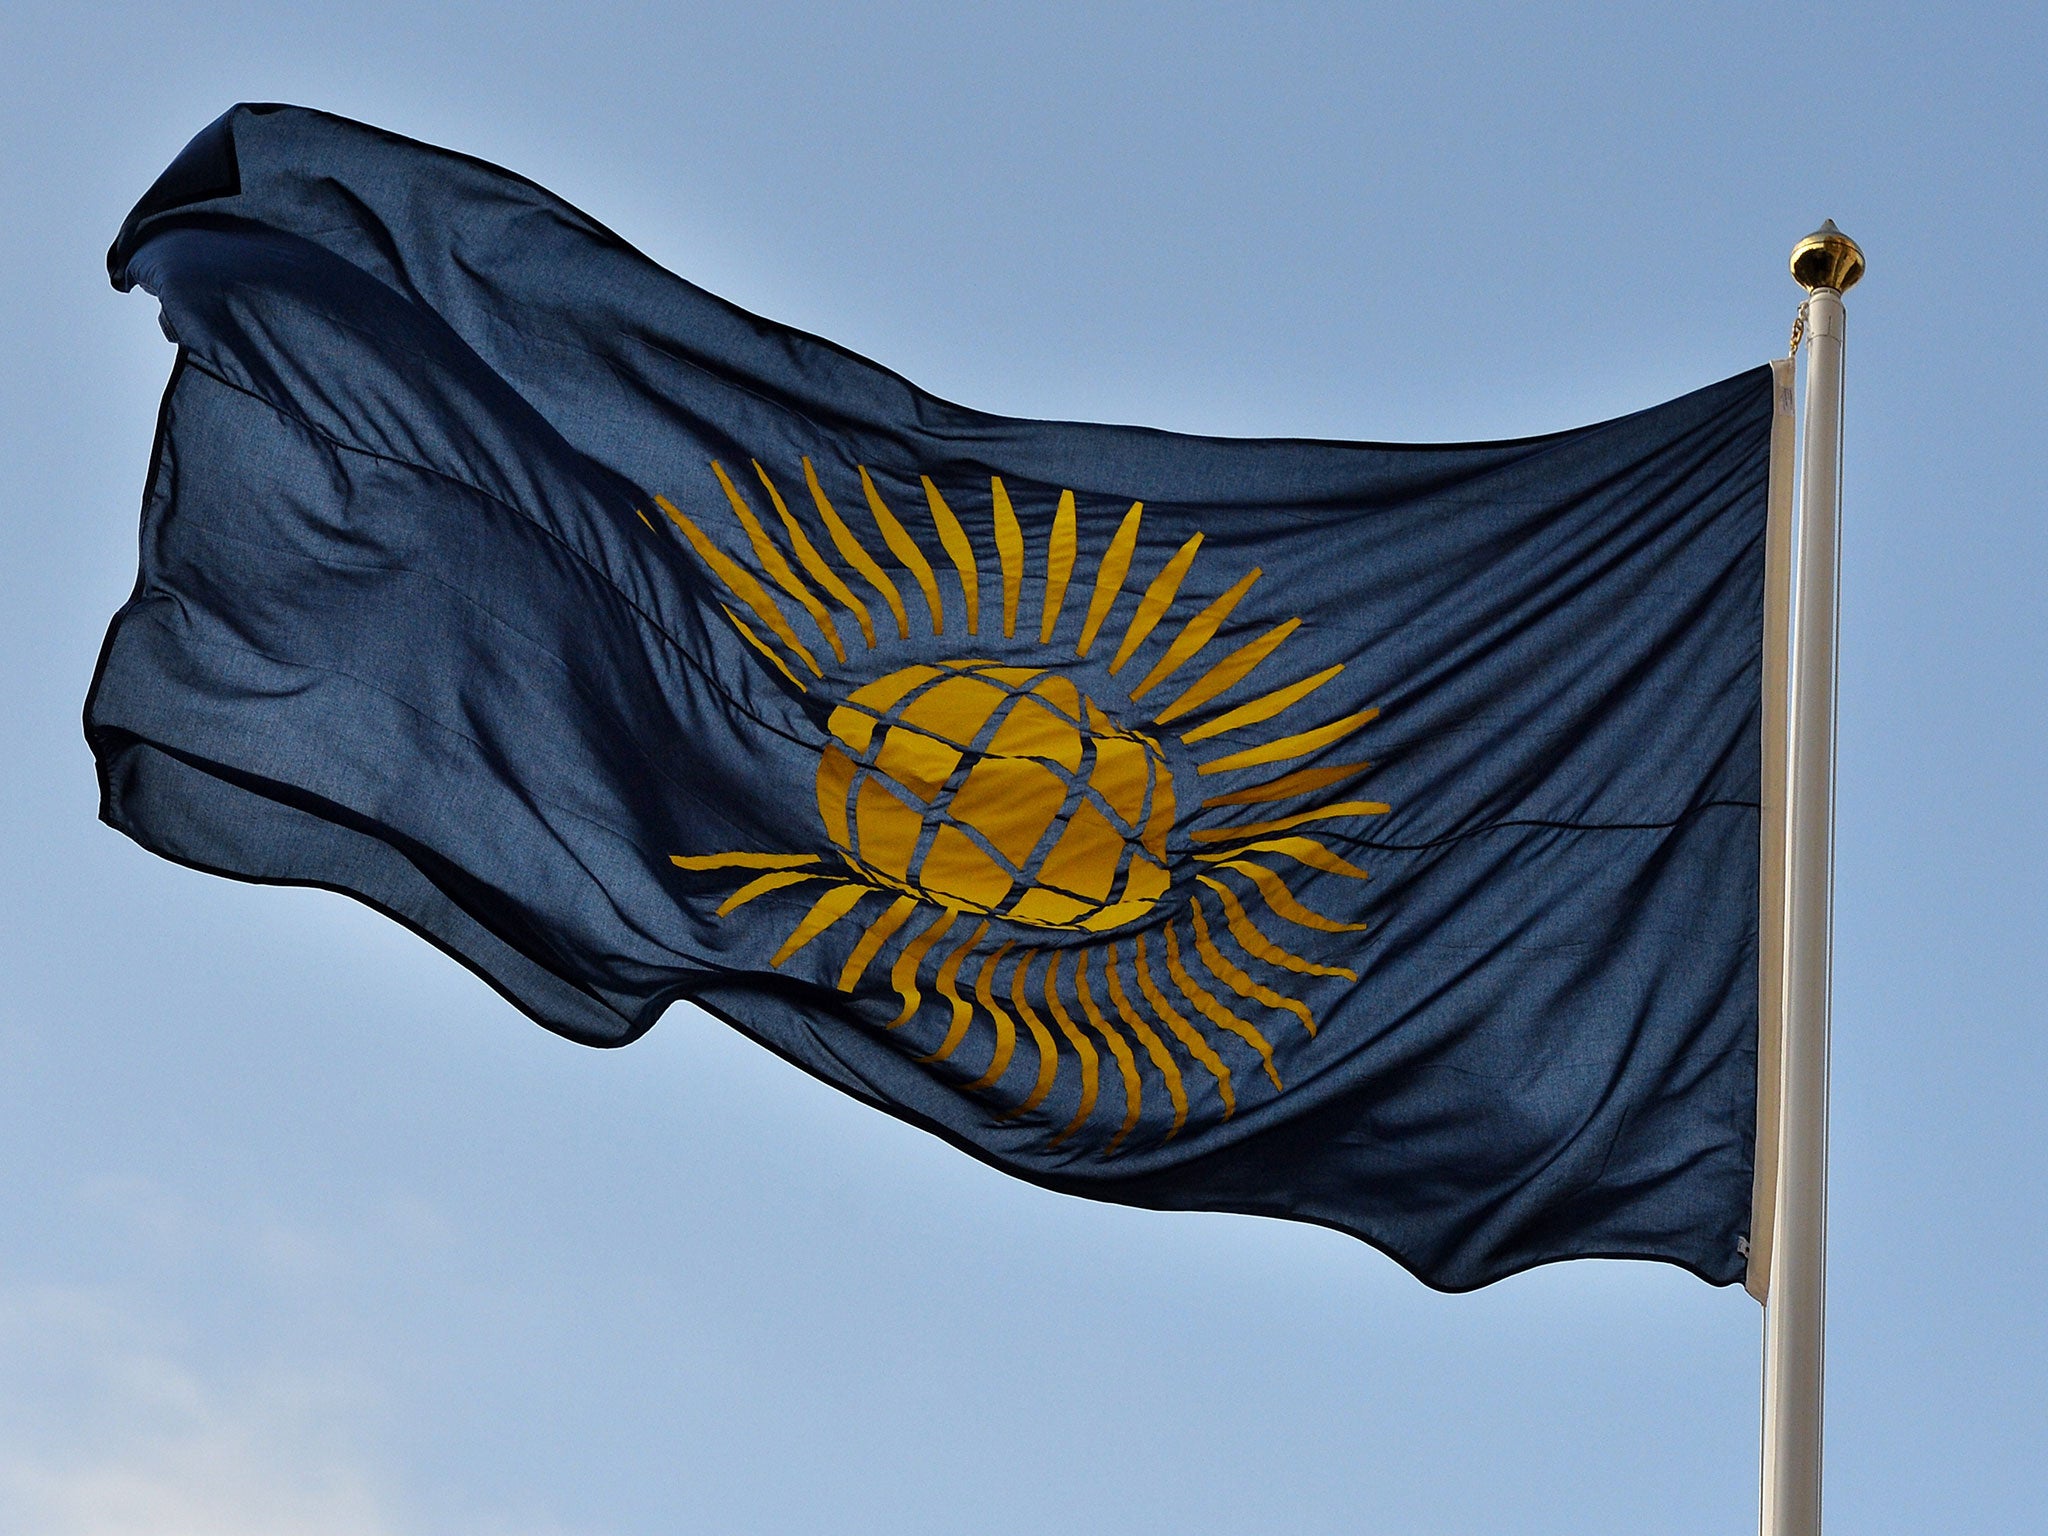 Commonwealth Day is being celebrated